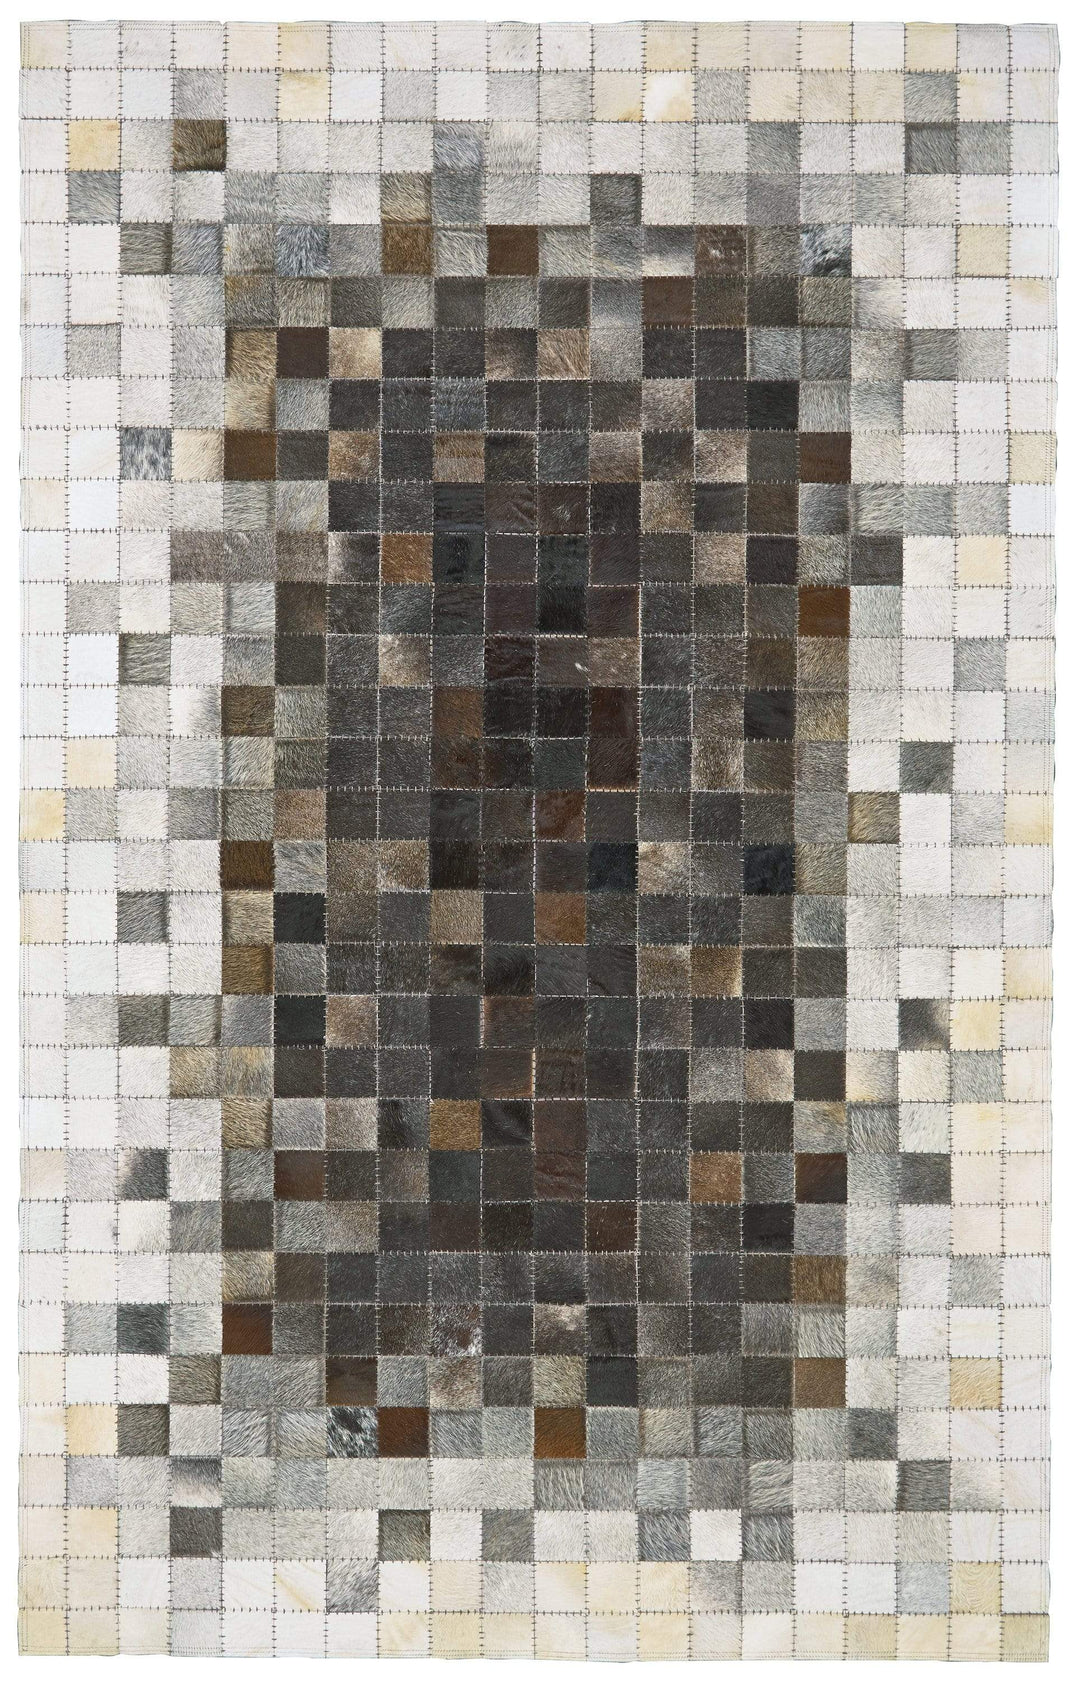 Feizy Feizy Estelle Mosaic Leather Cowhide Rug - Gray & Dark Brown - Available in 3 Sizes 6' x 9' SKNL9138FLS000E00